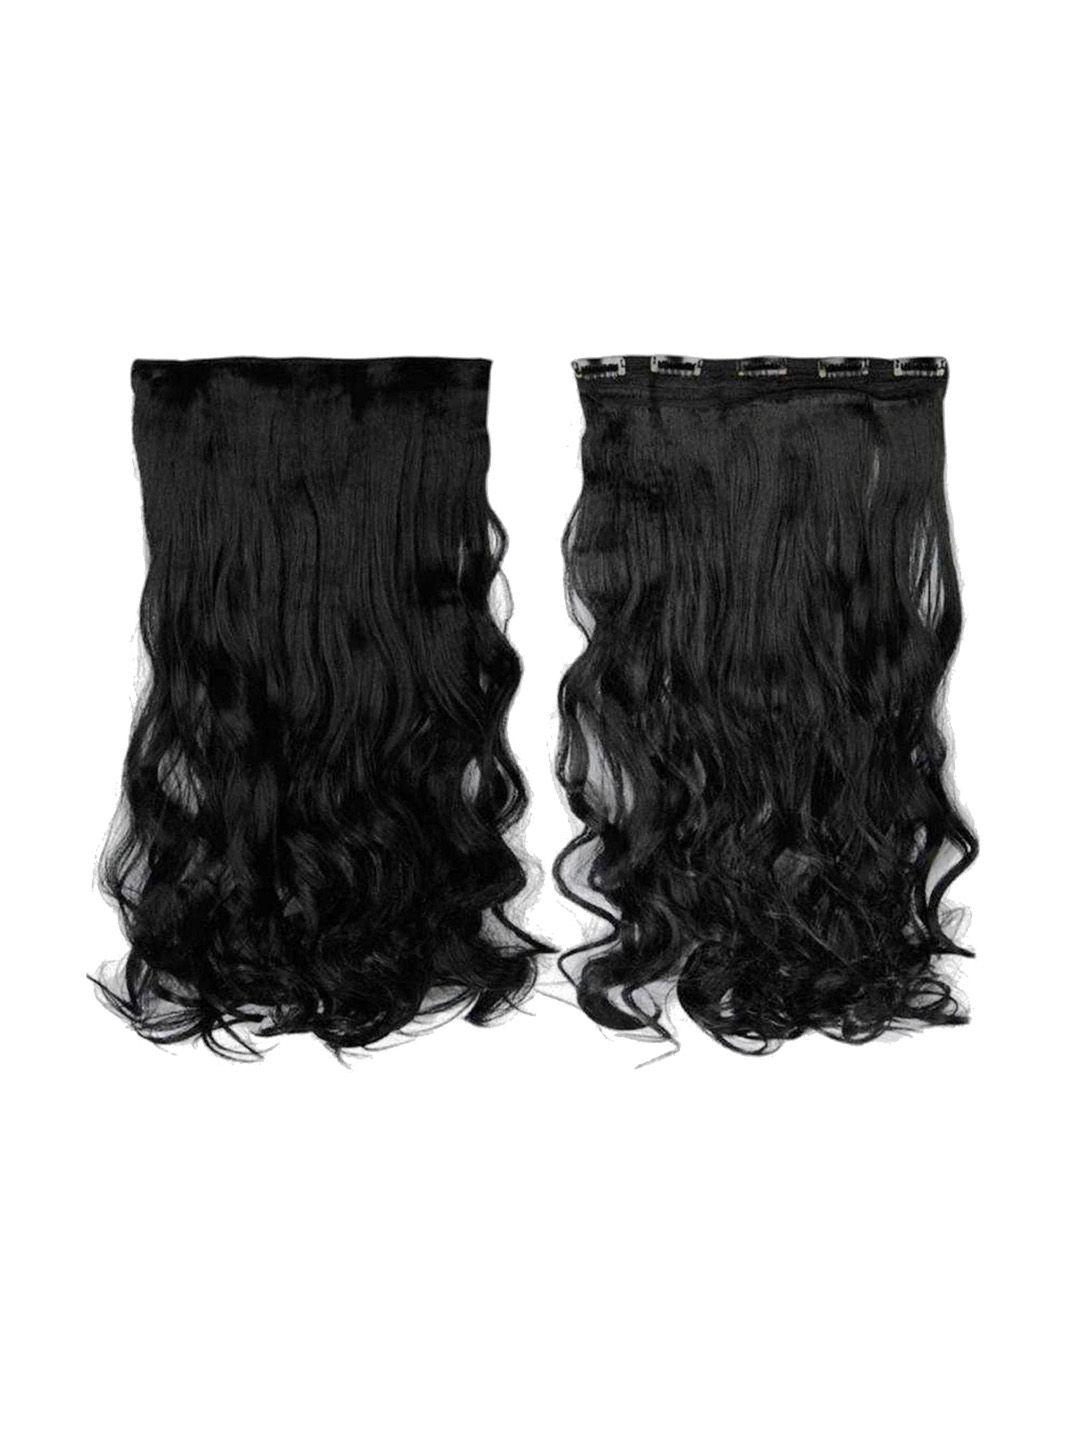 chanderkash women 5 clips based 24 inches synthetic curly hair extensions - black